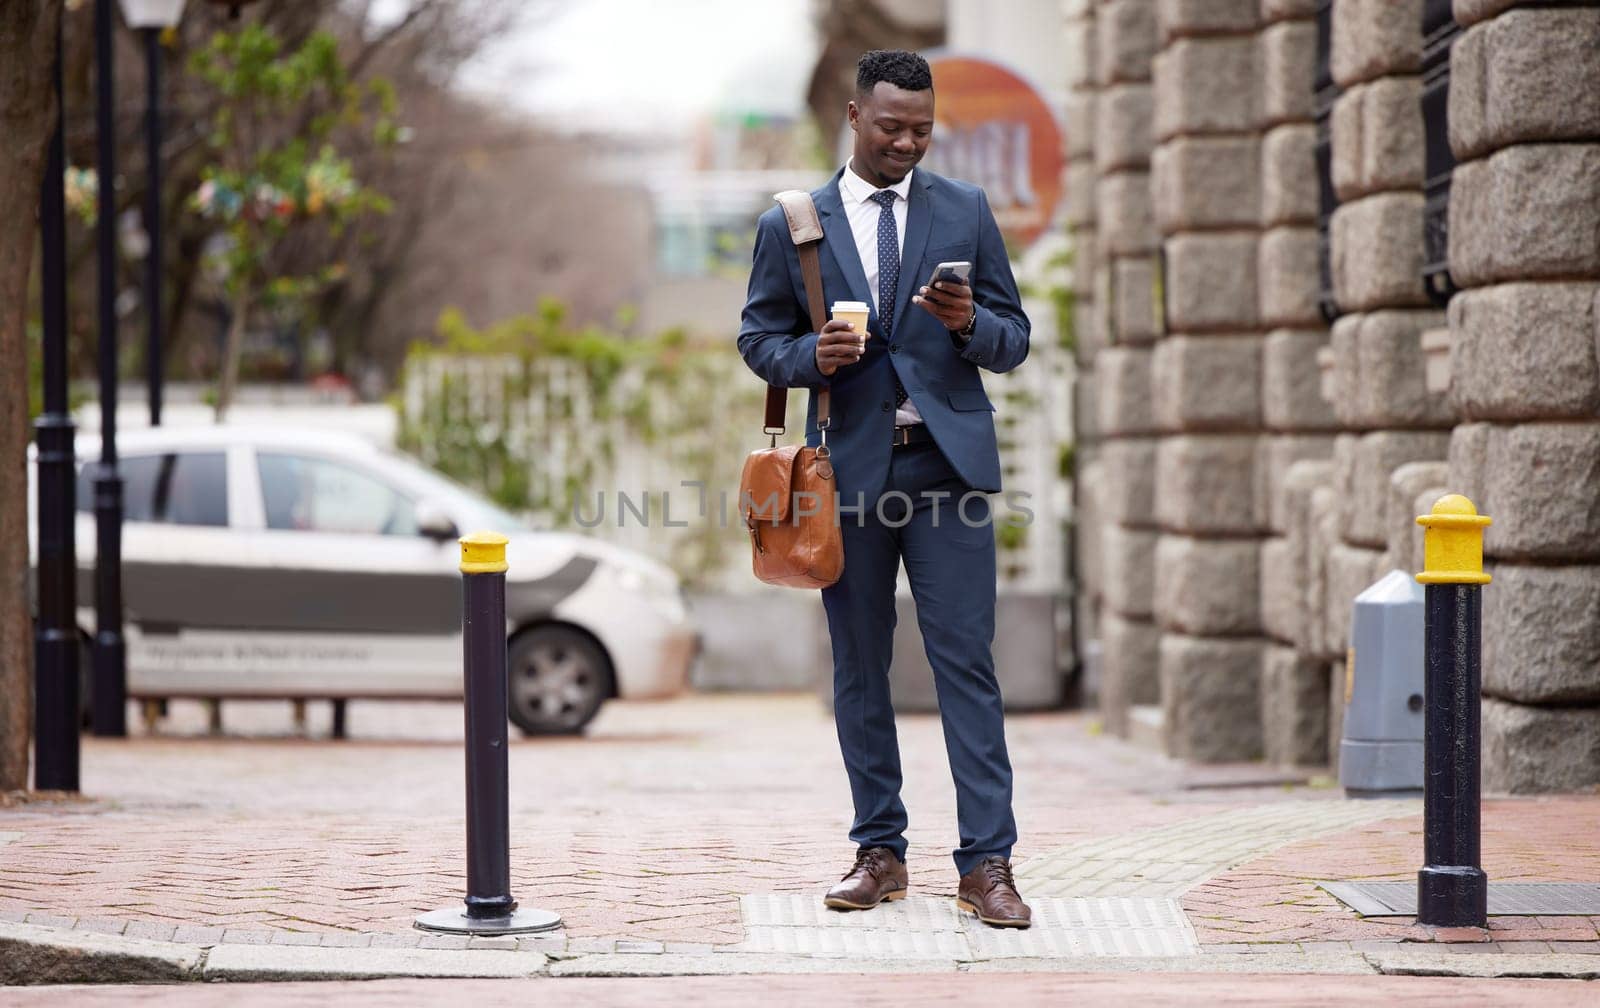 Cell phone, walk and black man in city for work commute, social media and networking in town. Travel, professional and male worked in road with coffee, smartphone and internet for texting and email.